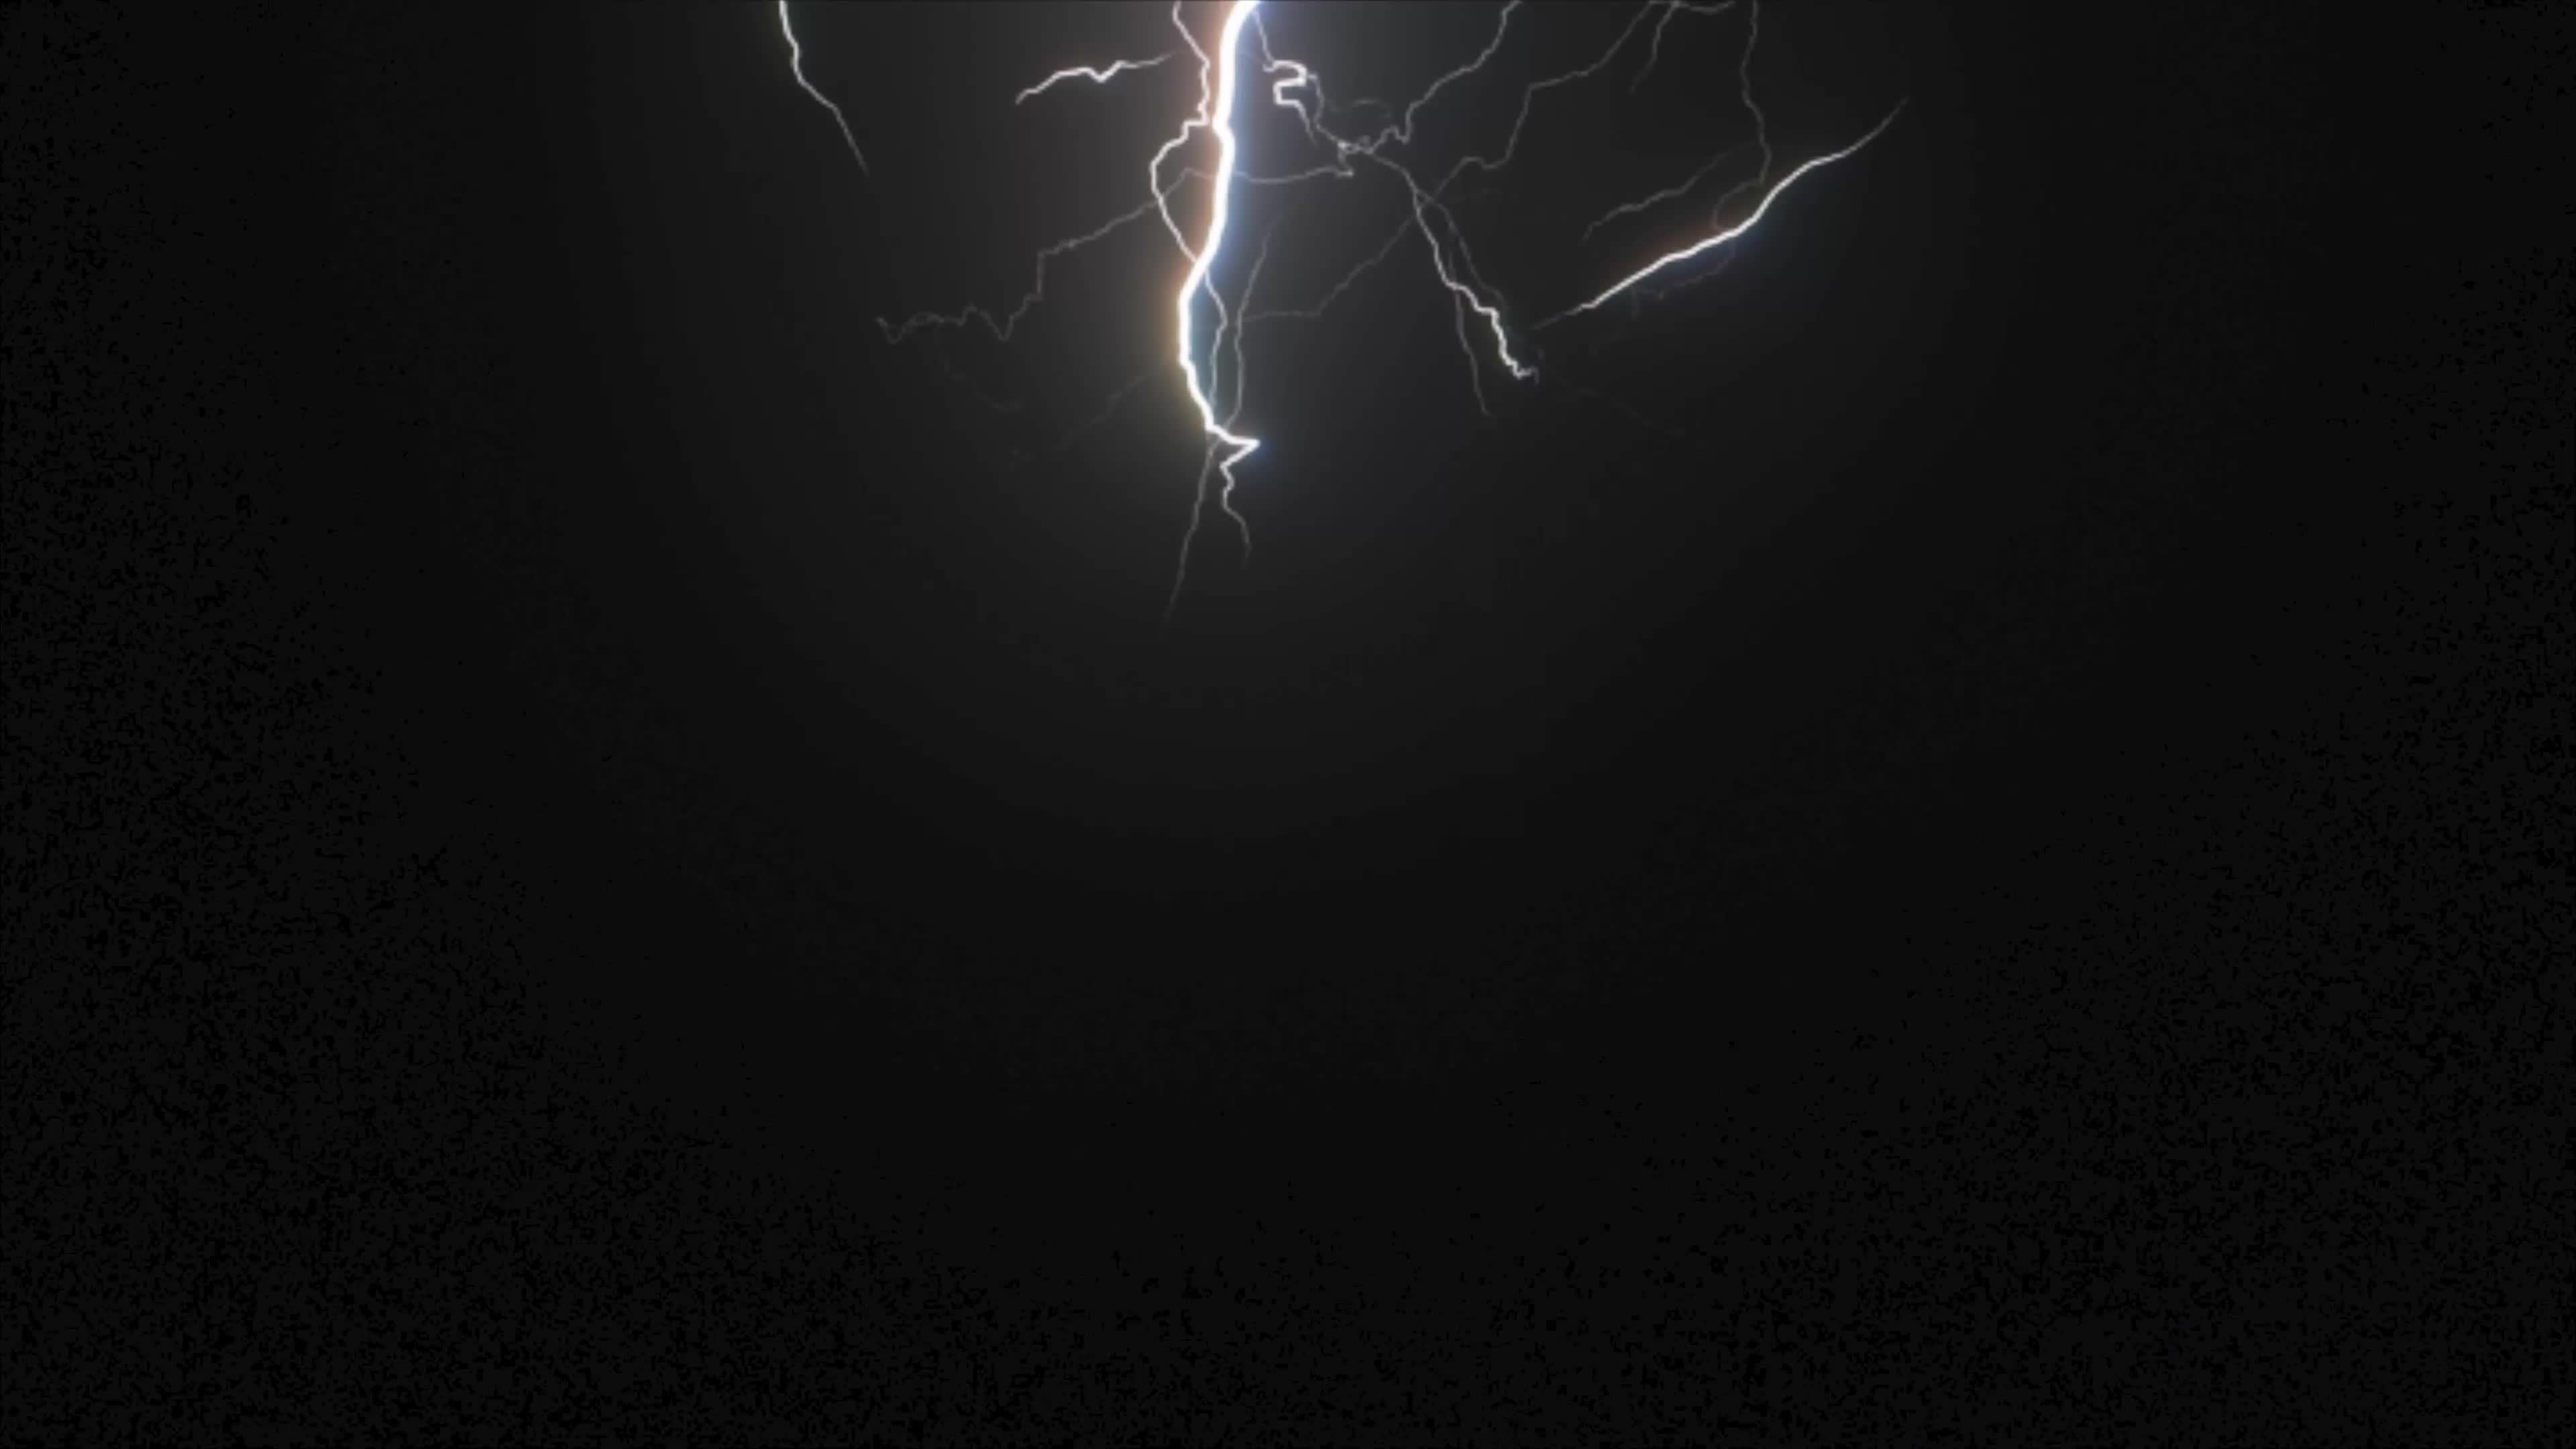 Thunder Animation Stock Video Footage for Free Download